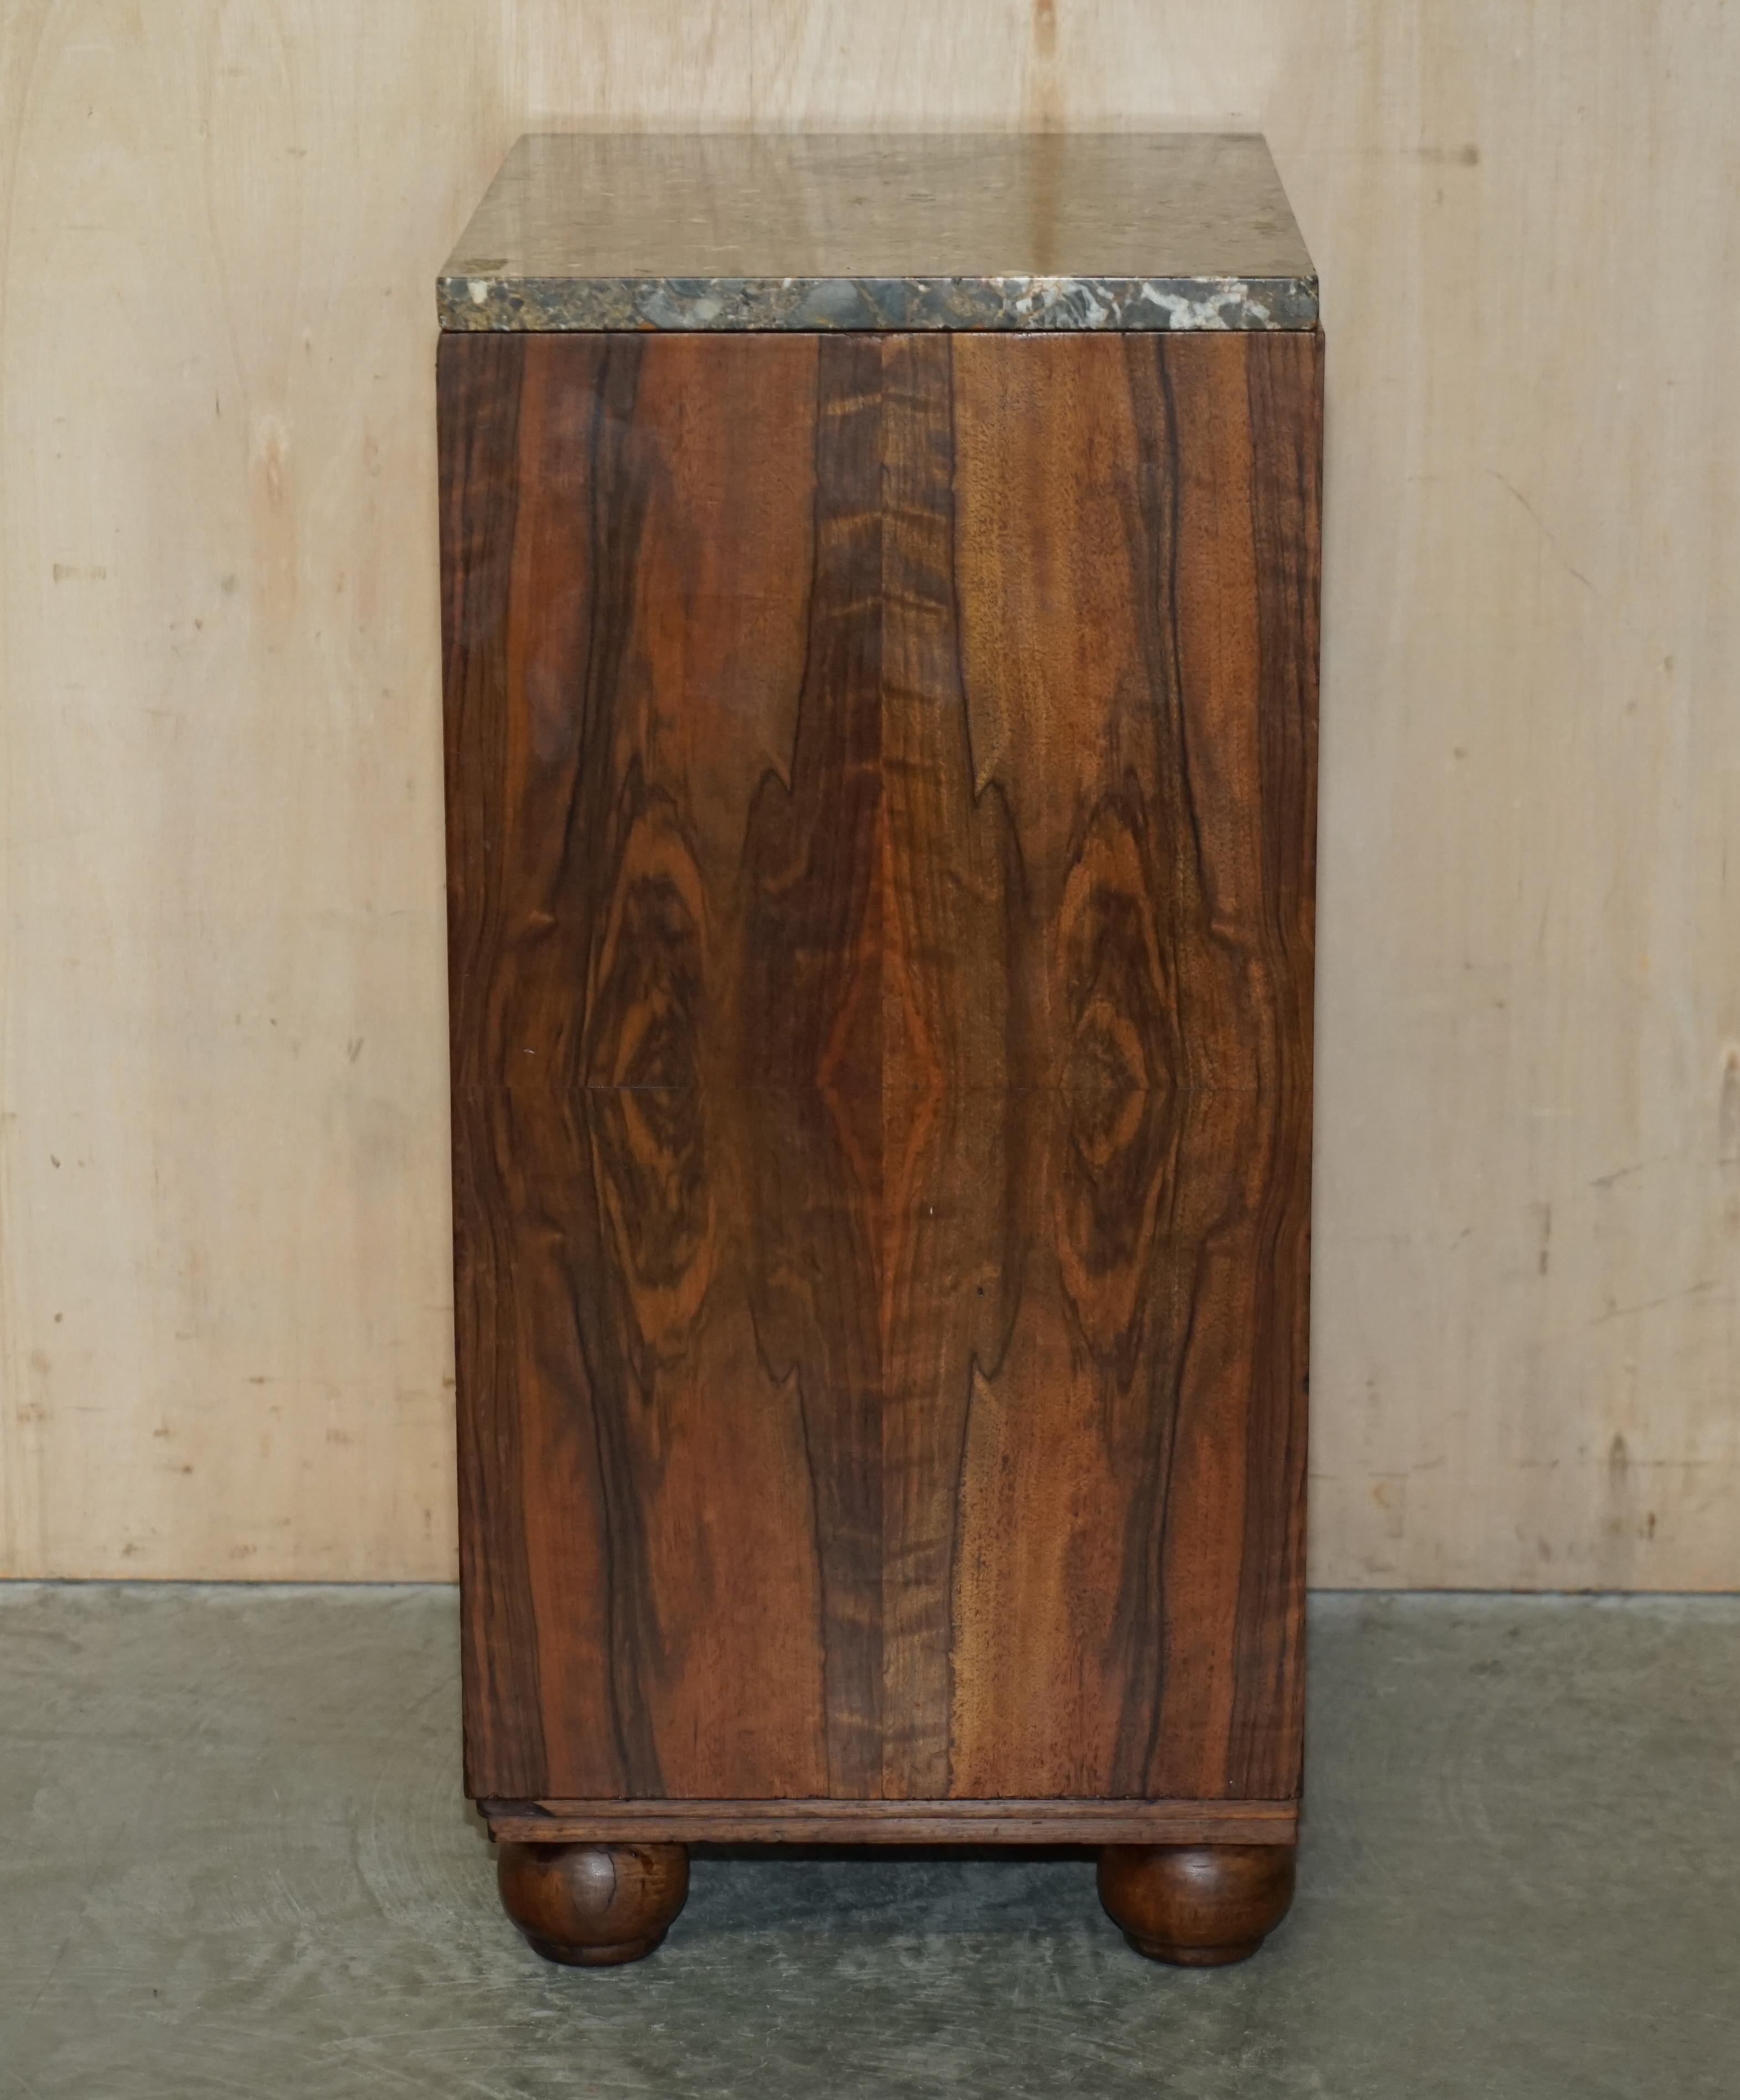 Pair of 1920s Art Deco Hardwood & Marble Bedside Nightstands Side Lamp Tables For Sale 12